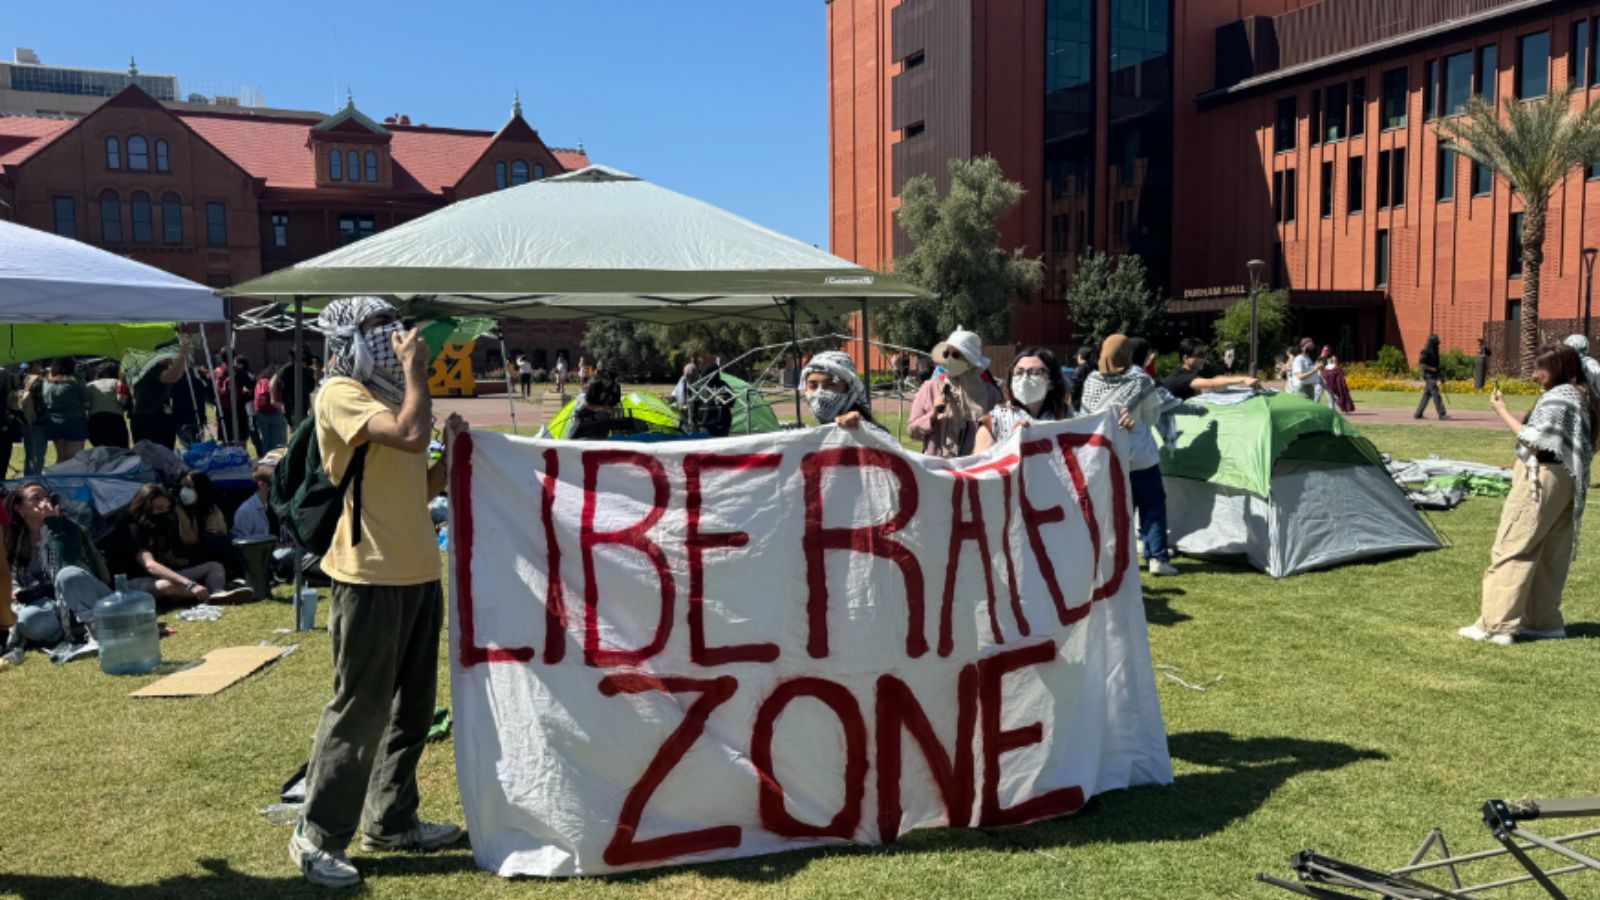 Pro-Palestine activists set up tents police tore down at ASU campus...